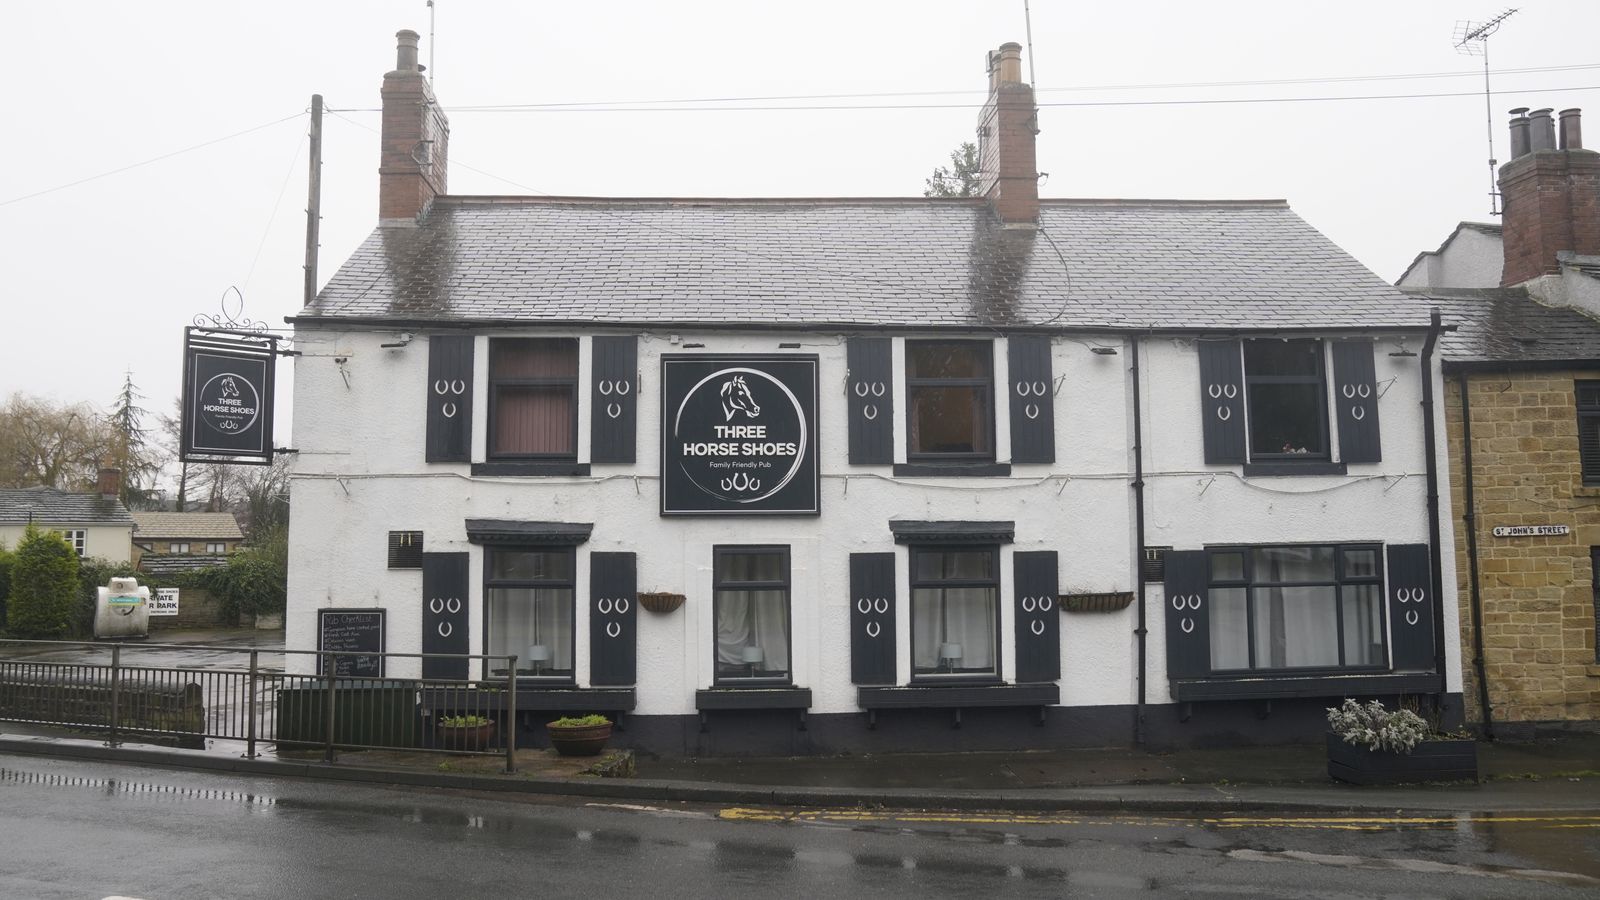 Leeds: Baby found dead in pub toilets likely 'stillborn' as police say case 'not a criminal inquiry'